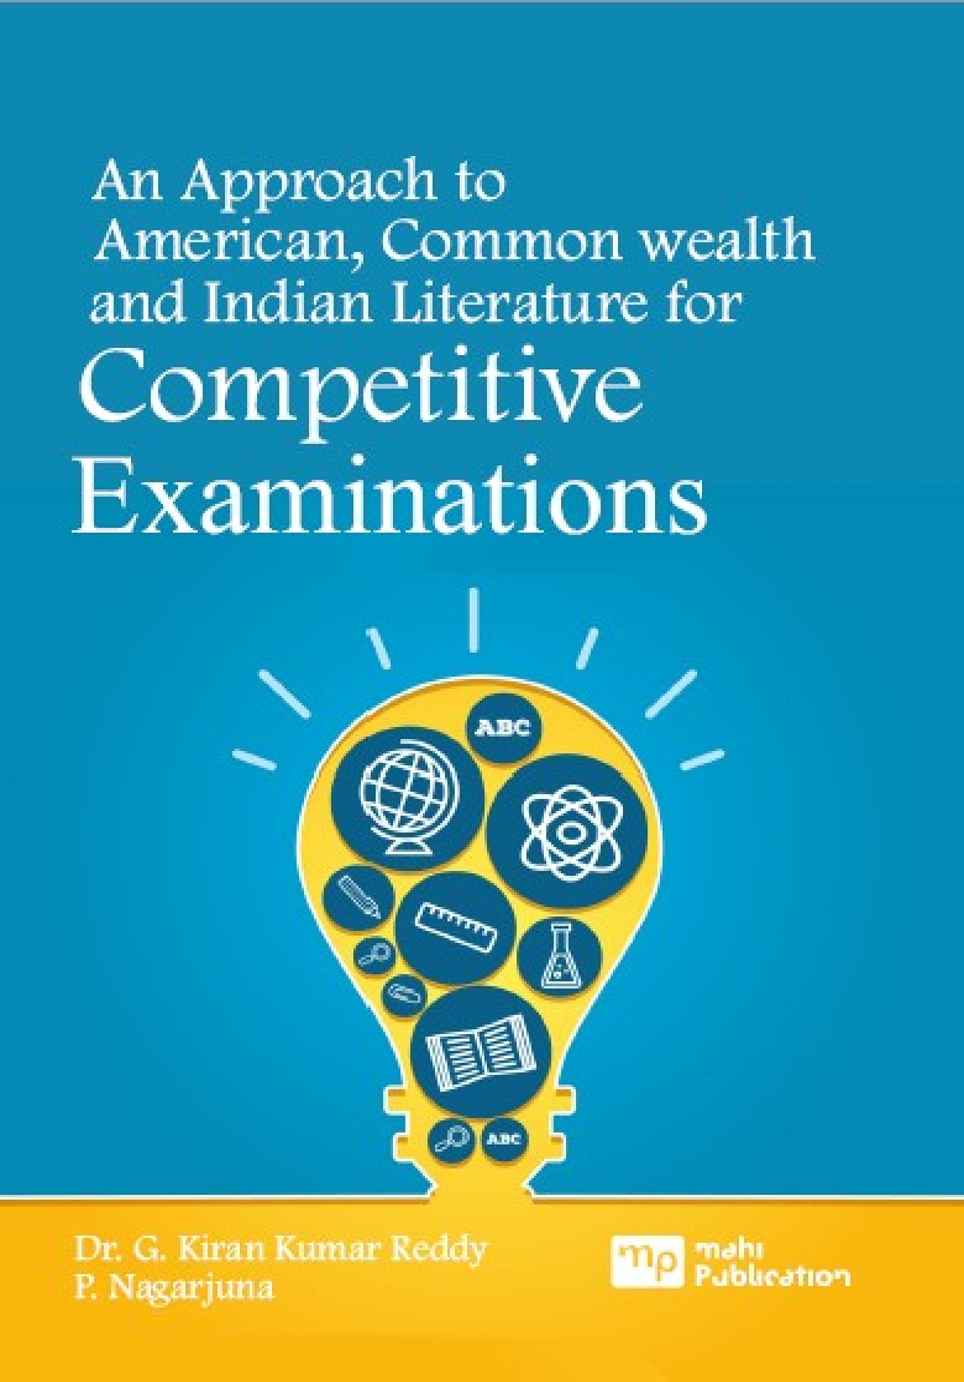 An Approach to American, Common Wealth and Indian Literature for Competitive Examinations